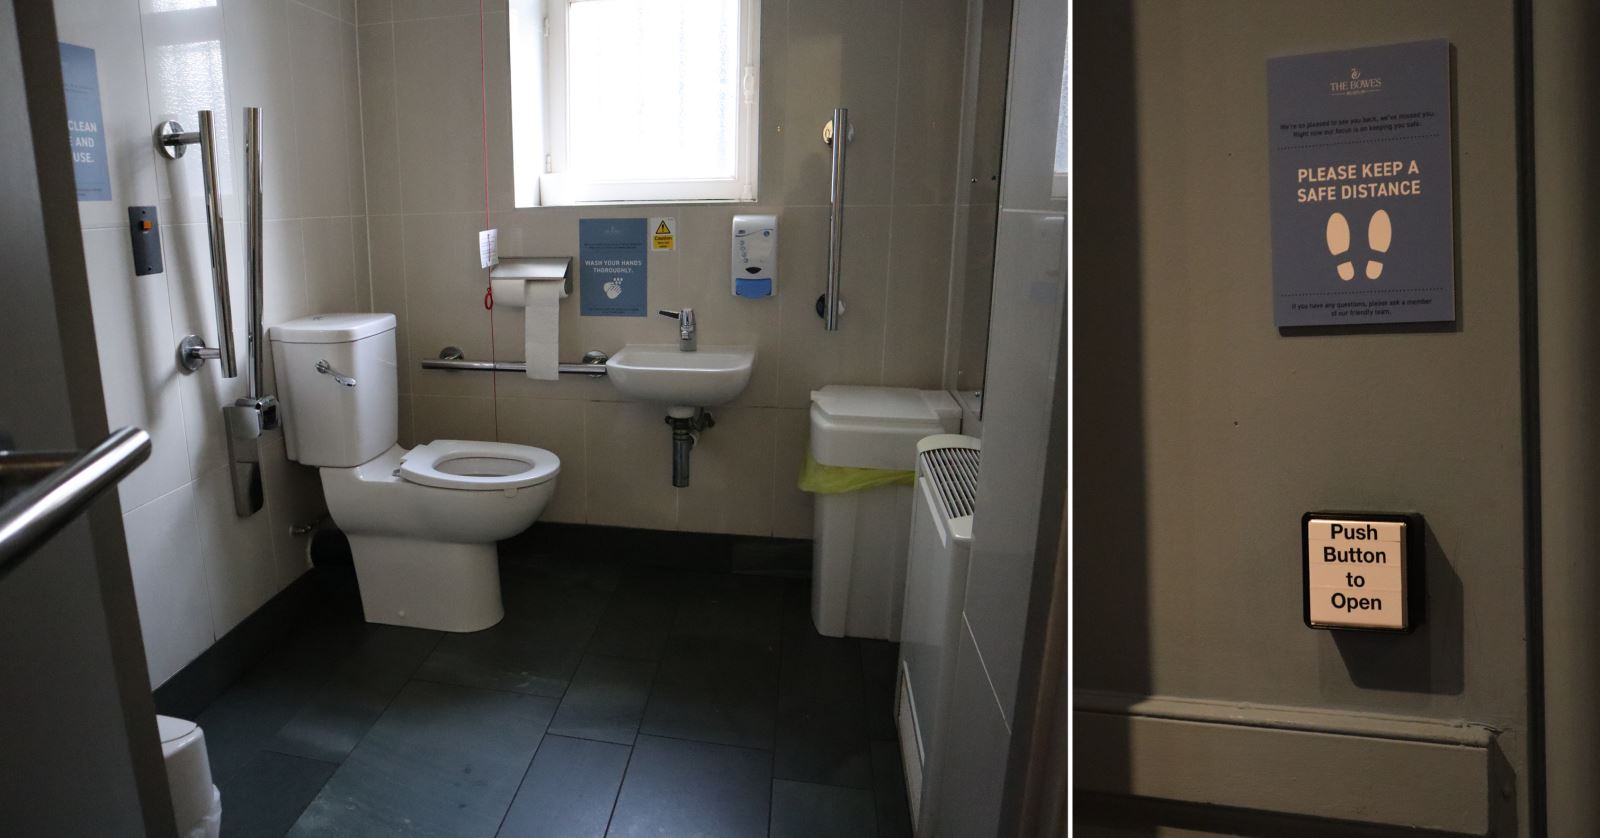 view of the disabled toilet inside The Bowes Museum and accessible door open buttons